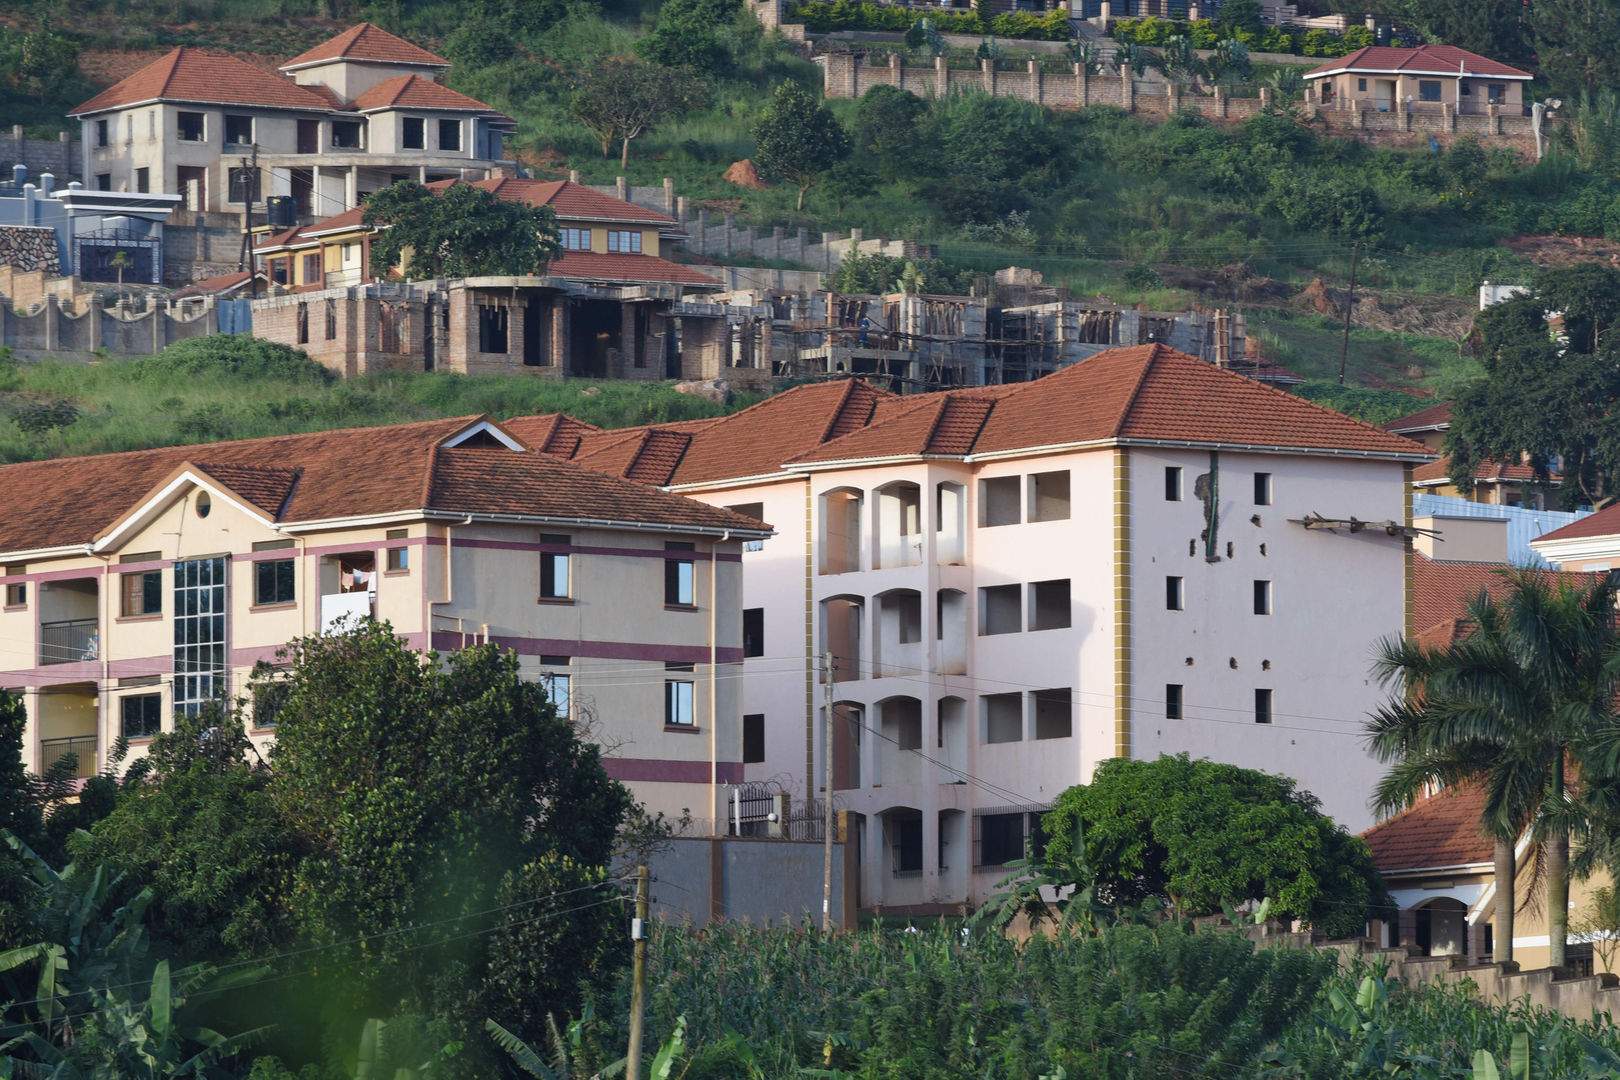 Land prices go up in Kampala suburbs